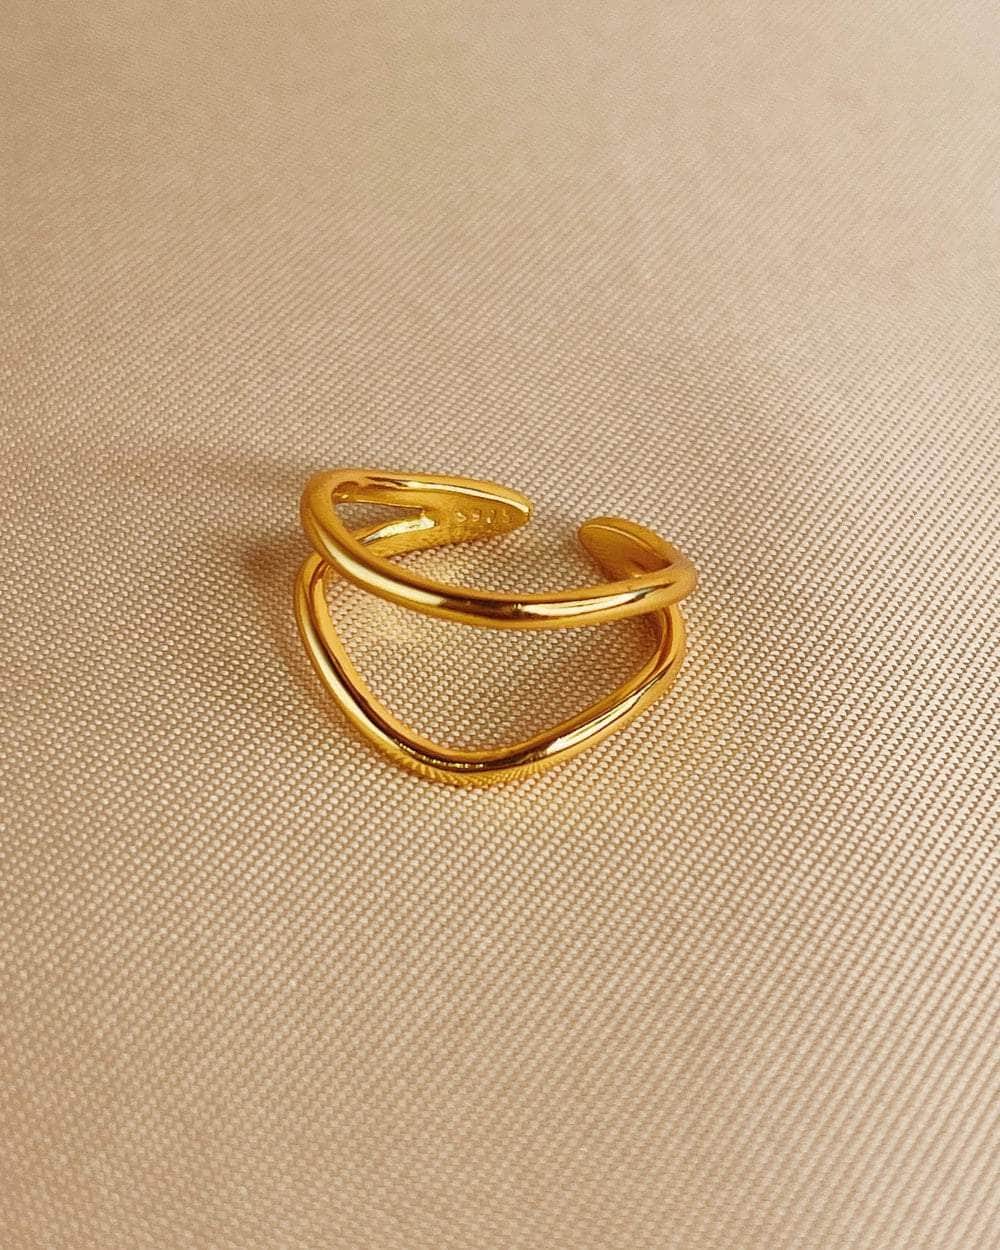 So Dainty Co. Rings Serenity Gold Ring Gold Plated 925 Sterling Silver Jewelry